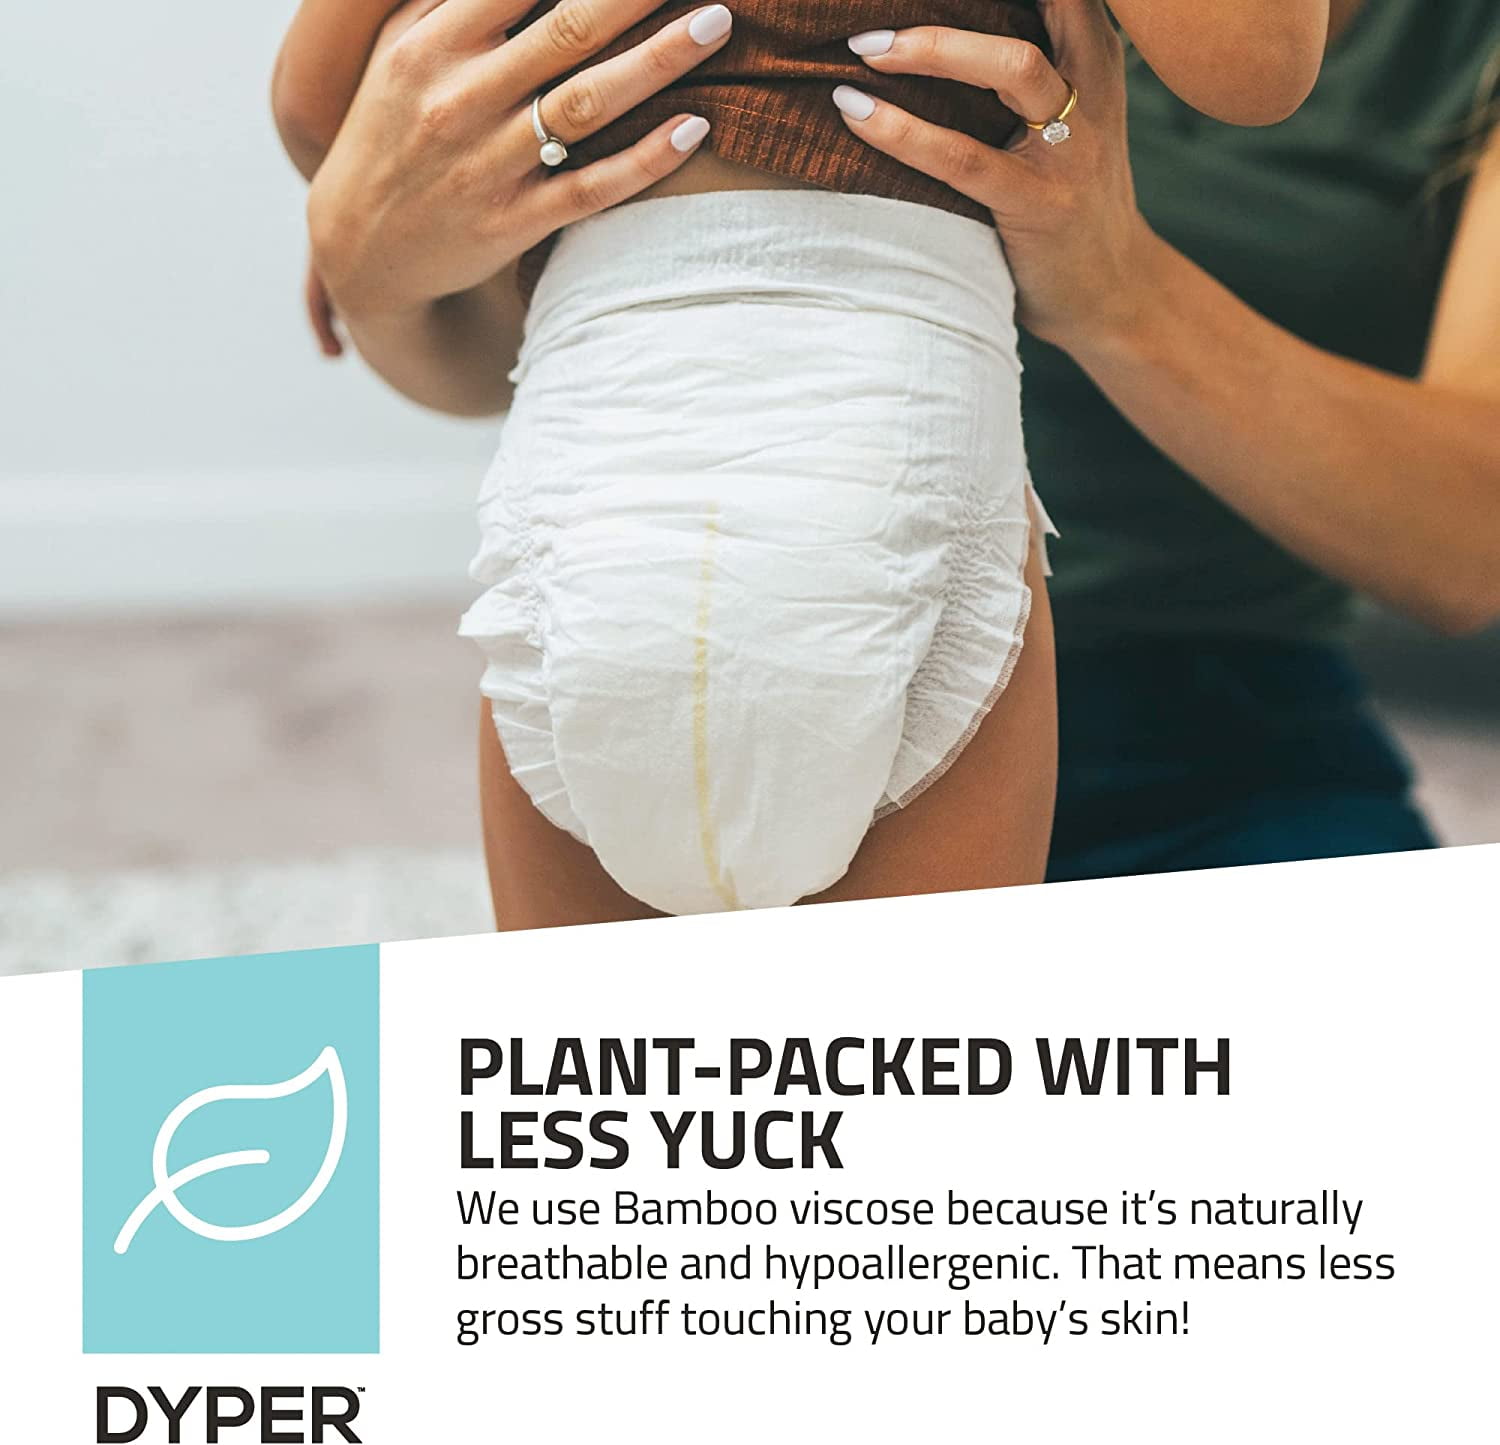 Plant-Based DYPER Bamboo Baby Diapers Size 1 / Newborn Eco-Friendly Hypoallergenic for Sensitive Skin 66 Count Cloth Alternative Natural Honest Ingredients Unscented Day & Overnight 